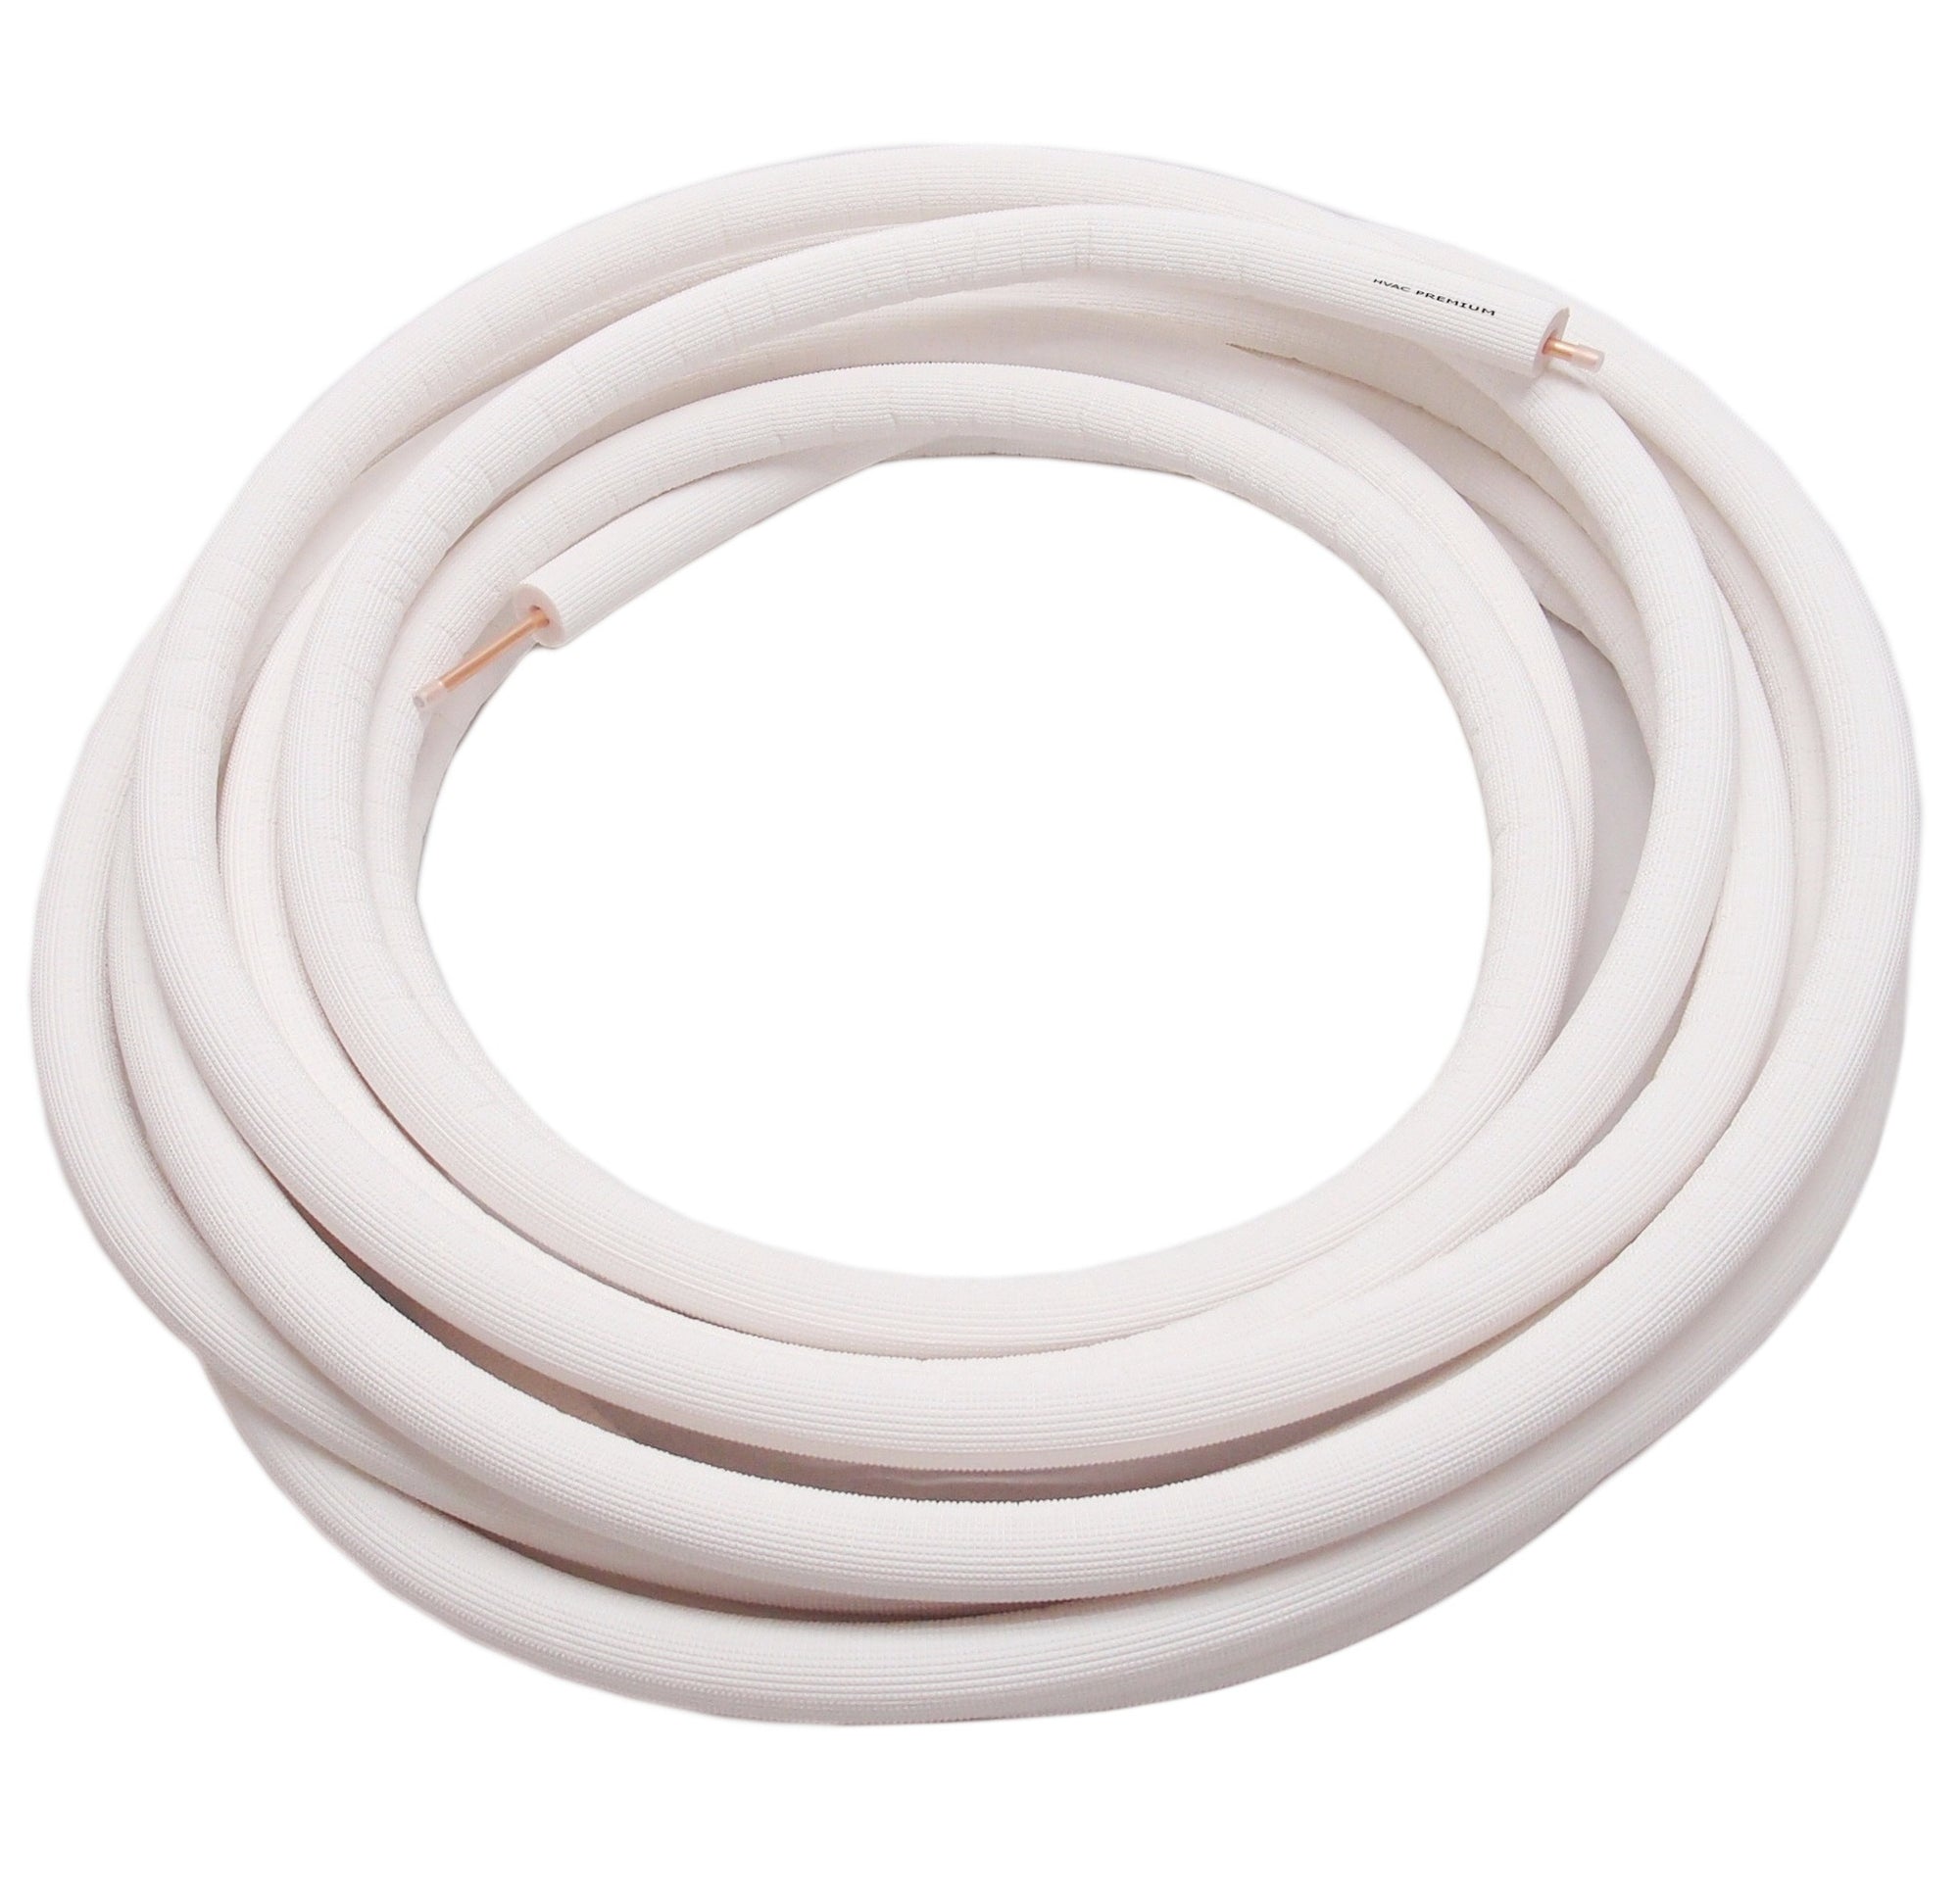 5/8" Insulated Copper Coil Line - Seamless Pipe Tube for HVAC, Refrigerant - 1/2" White Insulation - 25' Long